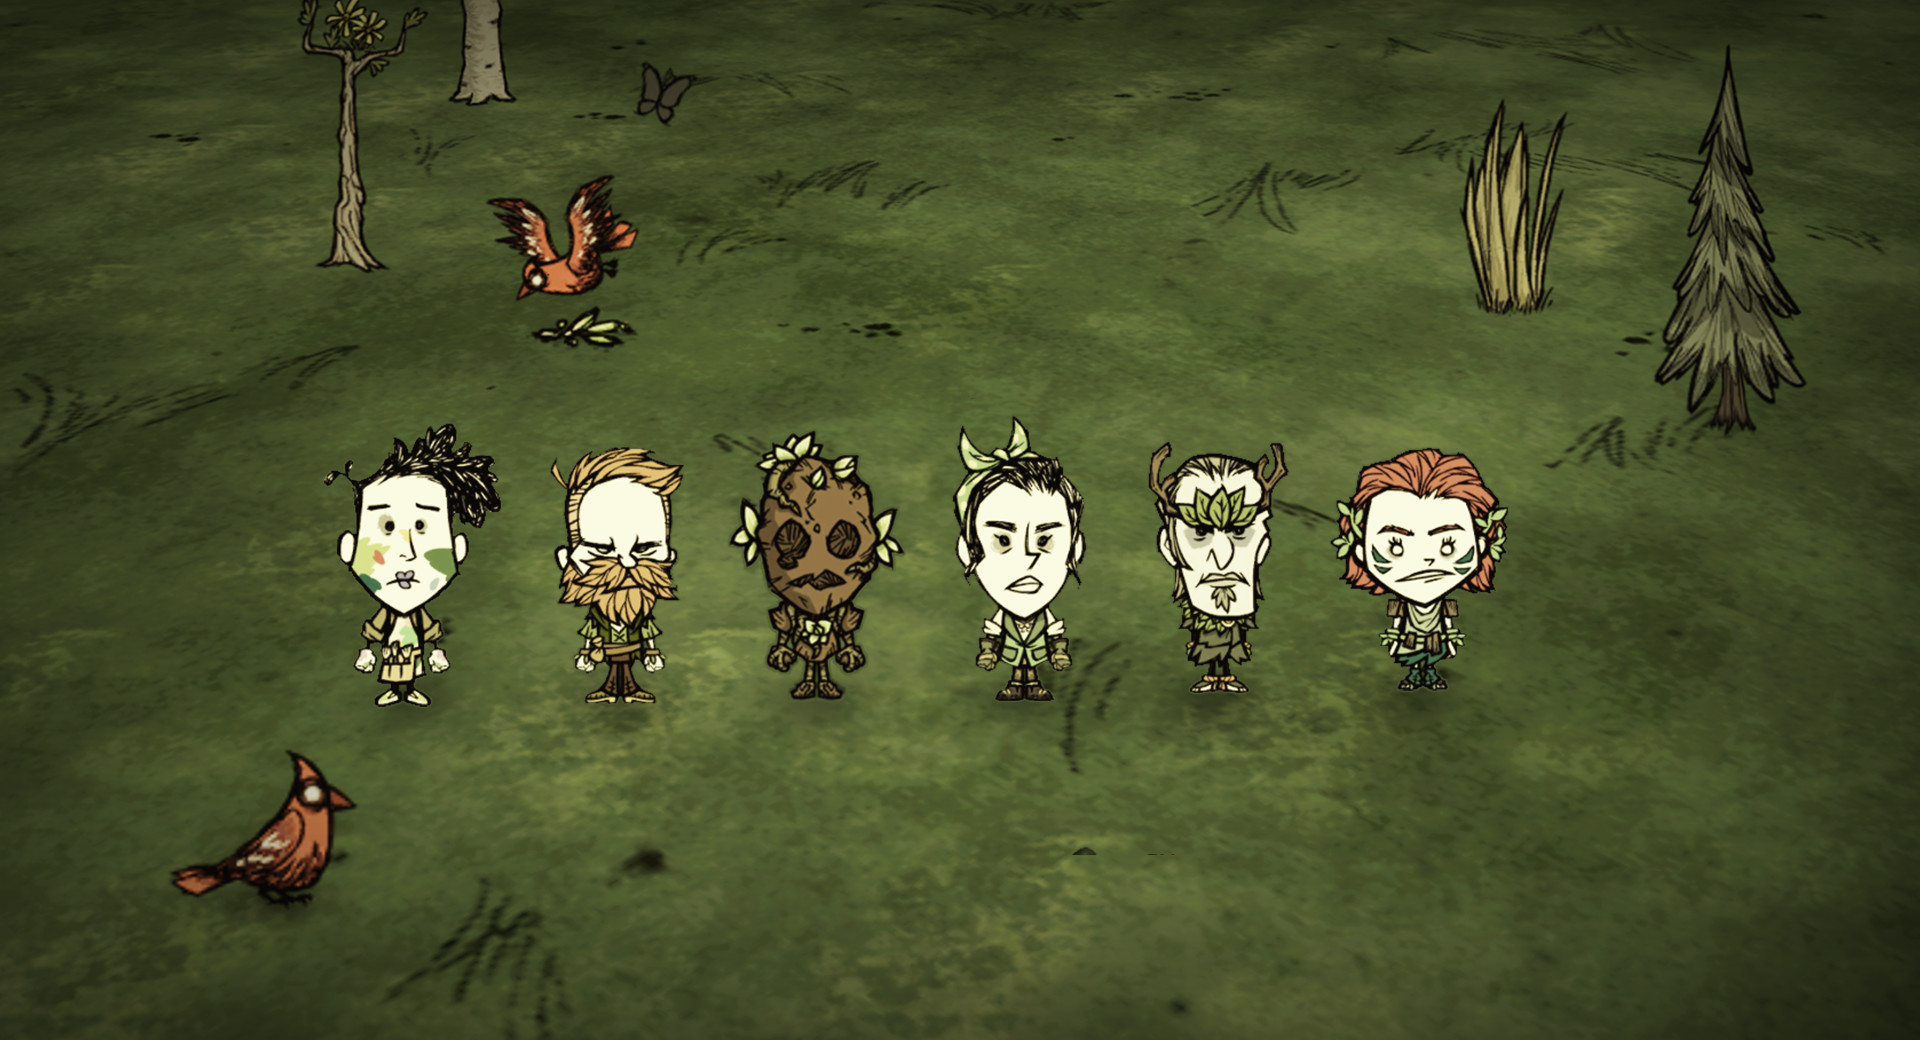 Don t start new. Don't Starve together. Дон старв тугеза. Don't Starve из игры. ДСТ don't Starve together.